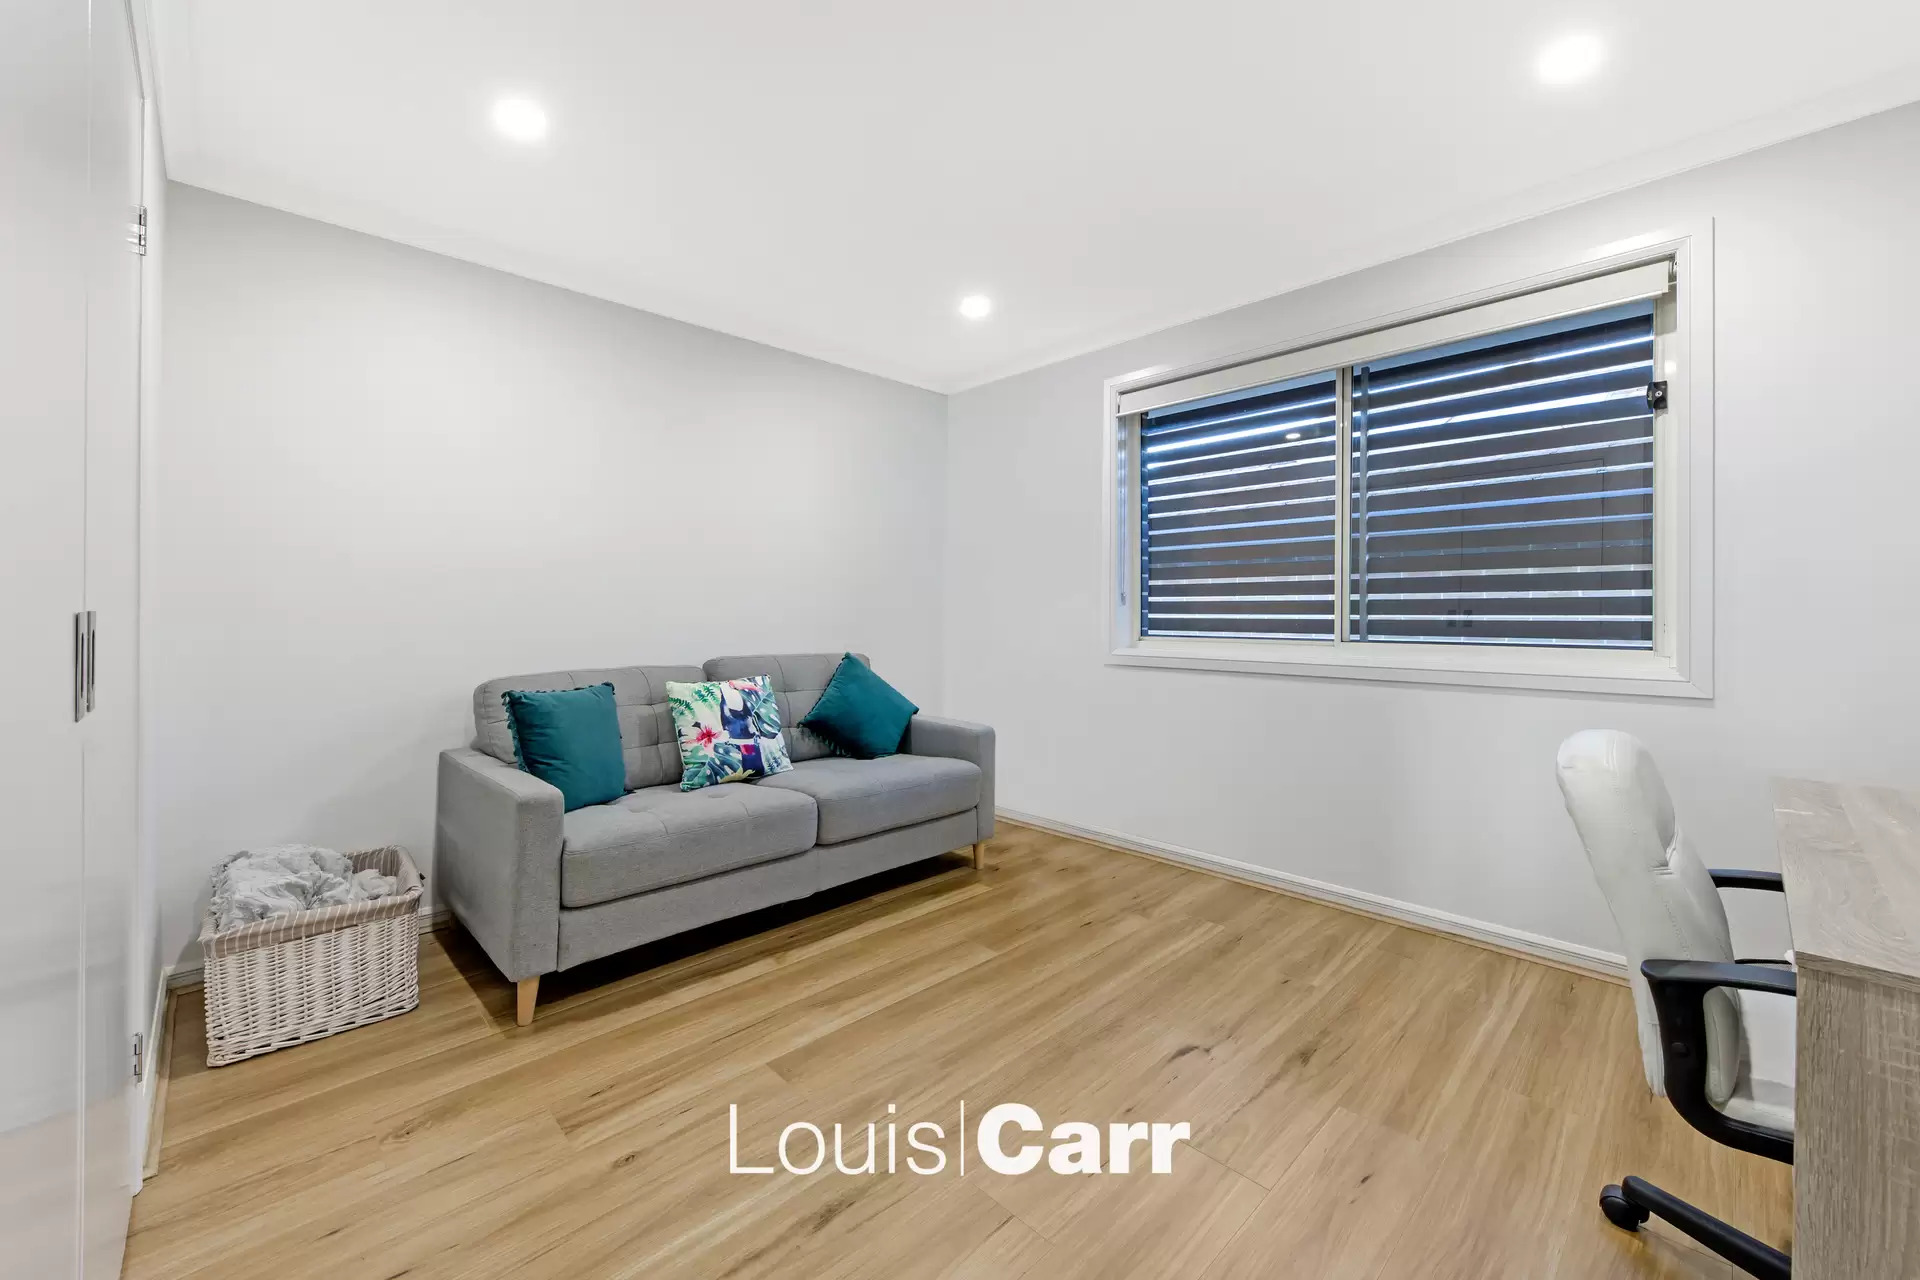 Photo #8: 9 Freshwater Road, Rouse Hill - For Sale by Louis Carr Real Estate